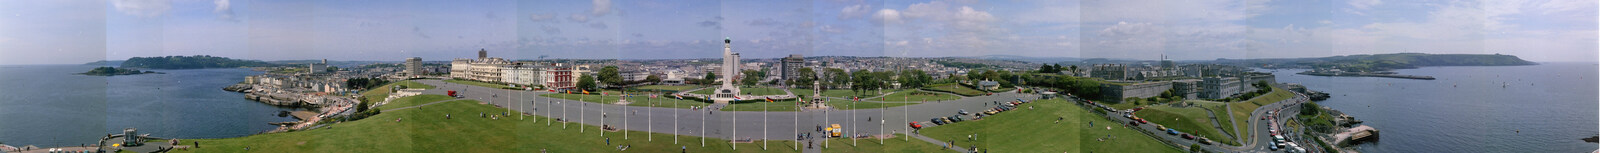 A panorama of Plymouth Sound and the Hoe (916kb, 6000px wide image) from Uni: A Plymouth Hoe Panorama, Plymouth, Devon - 7th May 1986